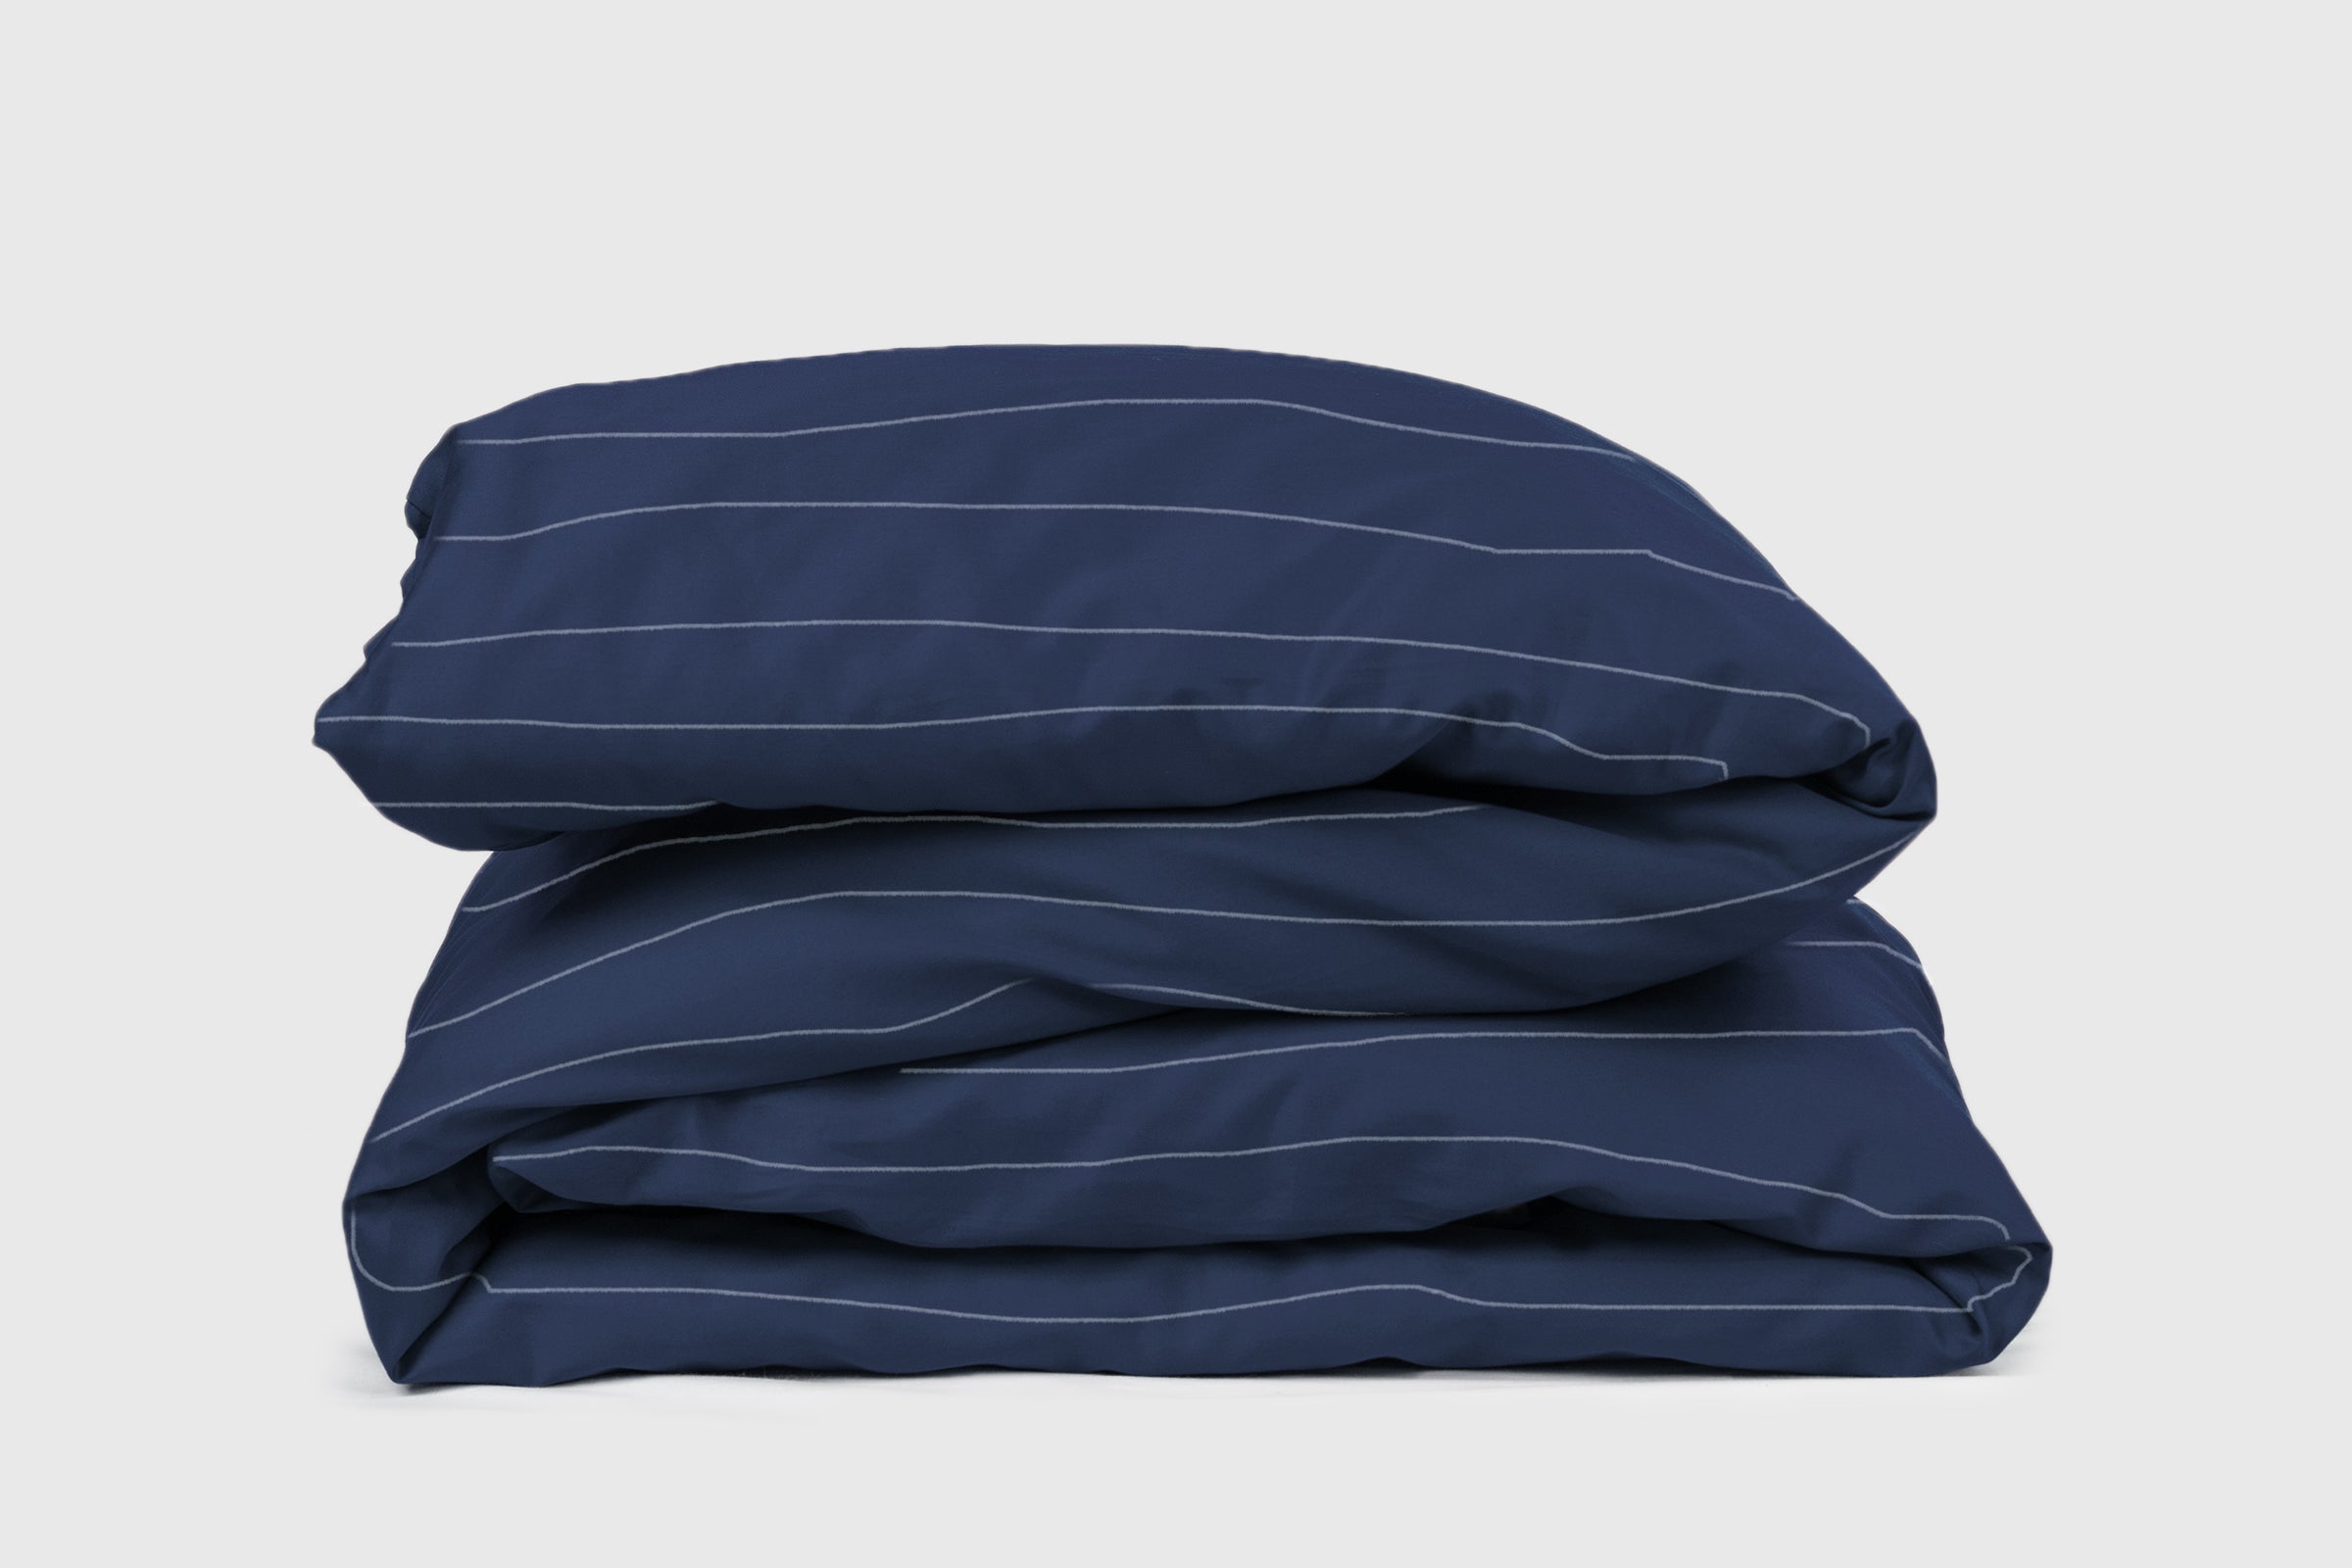 classic-navy-pinstripes-duvet-cover-product-shot-by-sojao.jpg